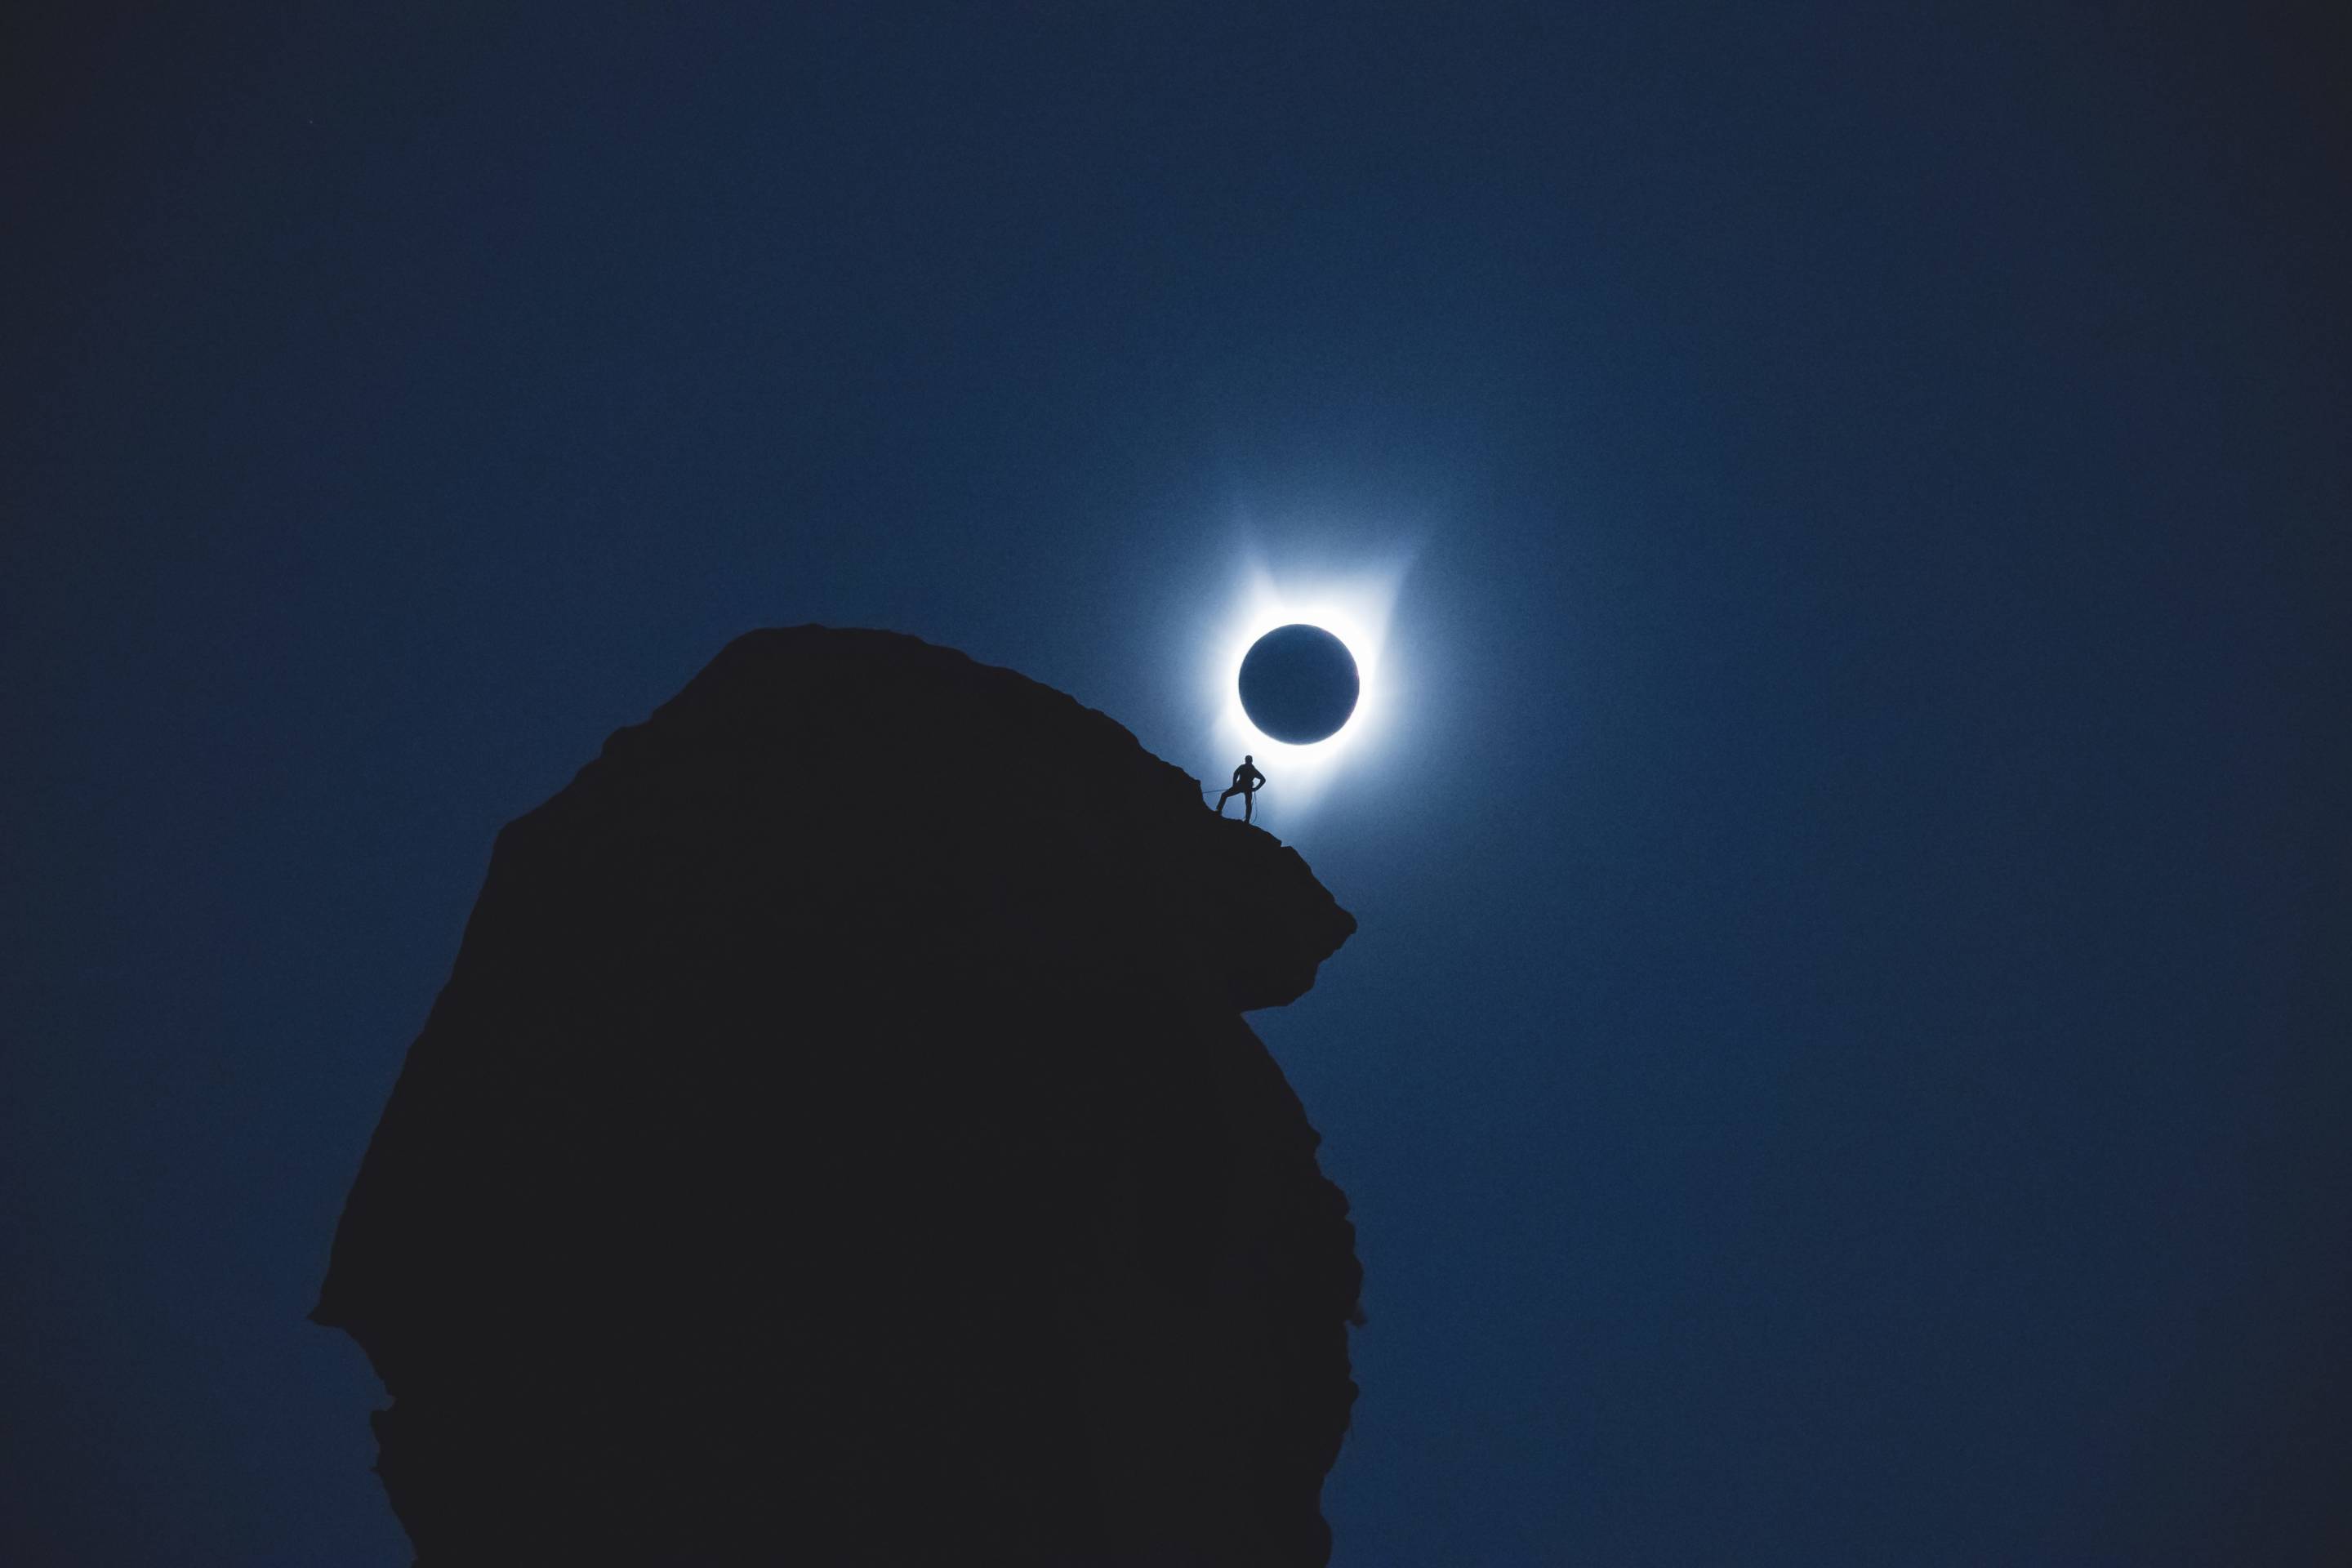 Viral photo of a climber in totality during the total solar eclipse of 2017. Photo taken at Smith Rock state park by Andrew Studer